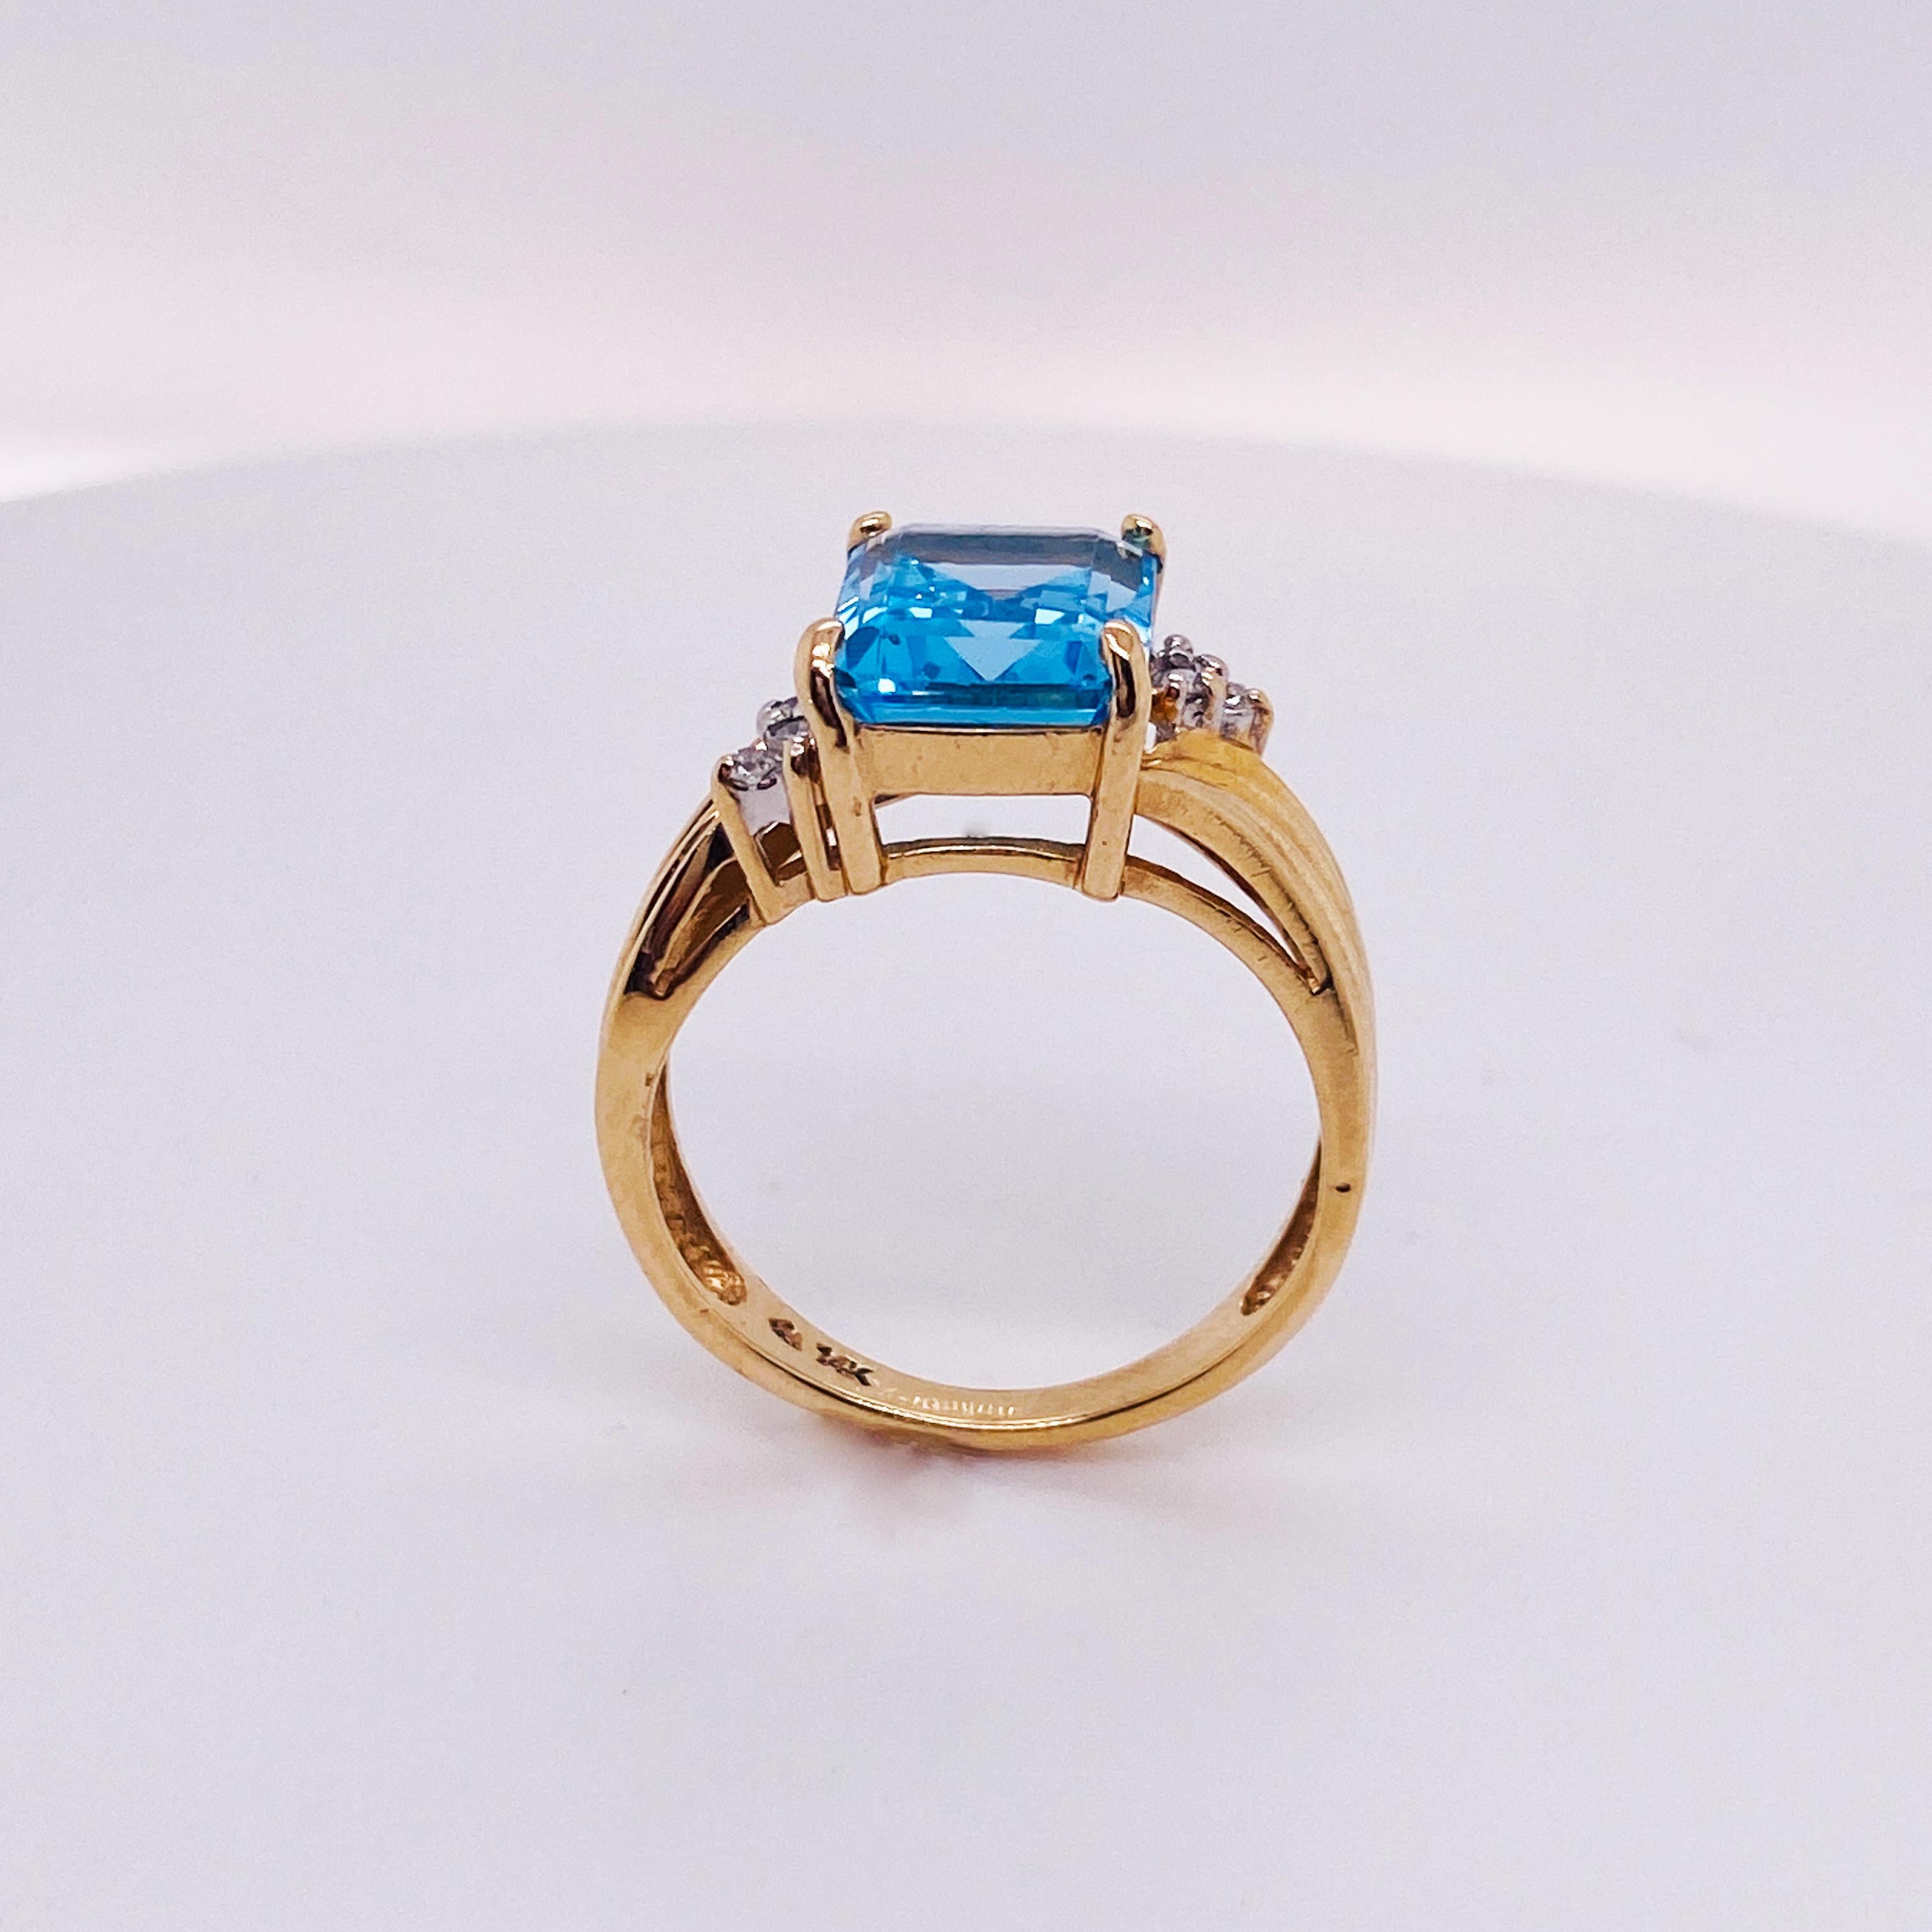 Emerald Cut 2.05 Carat Bright Ocean Blue Topaz, 14k Gold Wave Ring with Diamond Accents For Sale